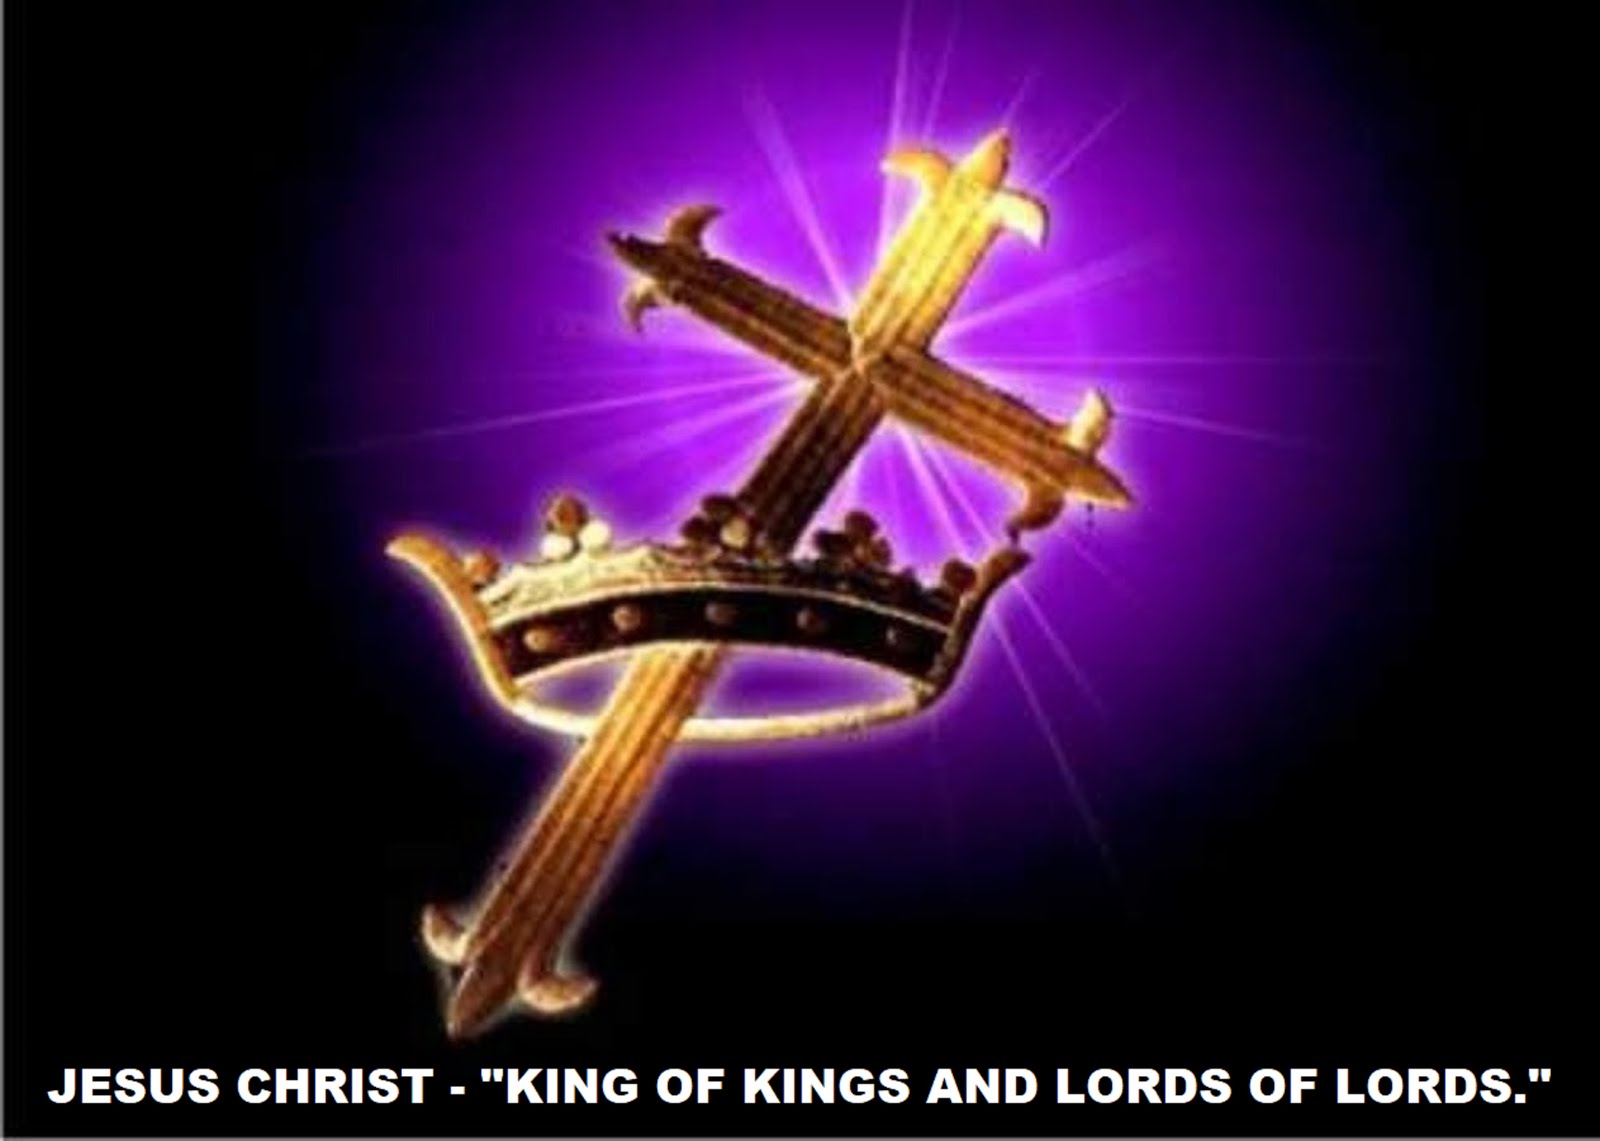 JESUS CHRIST - KING OF KINGS AND LORD OF LORD OF LORDS